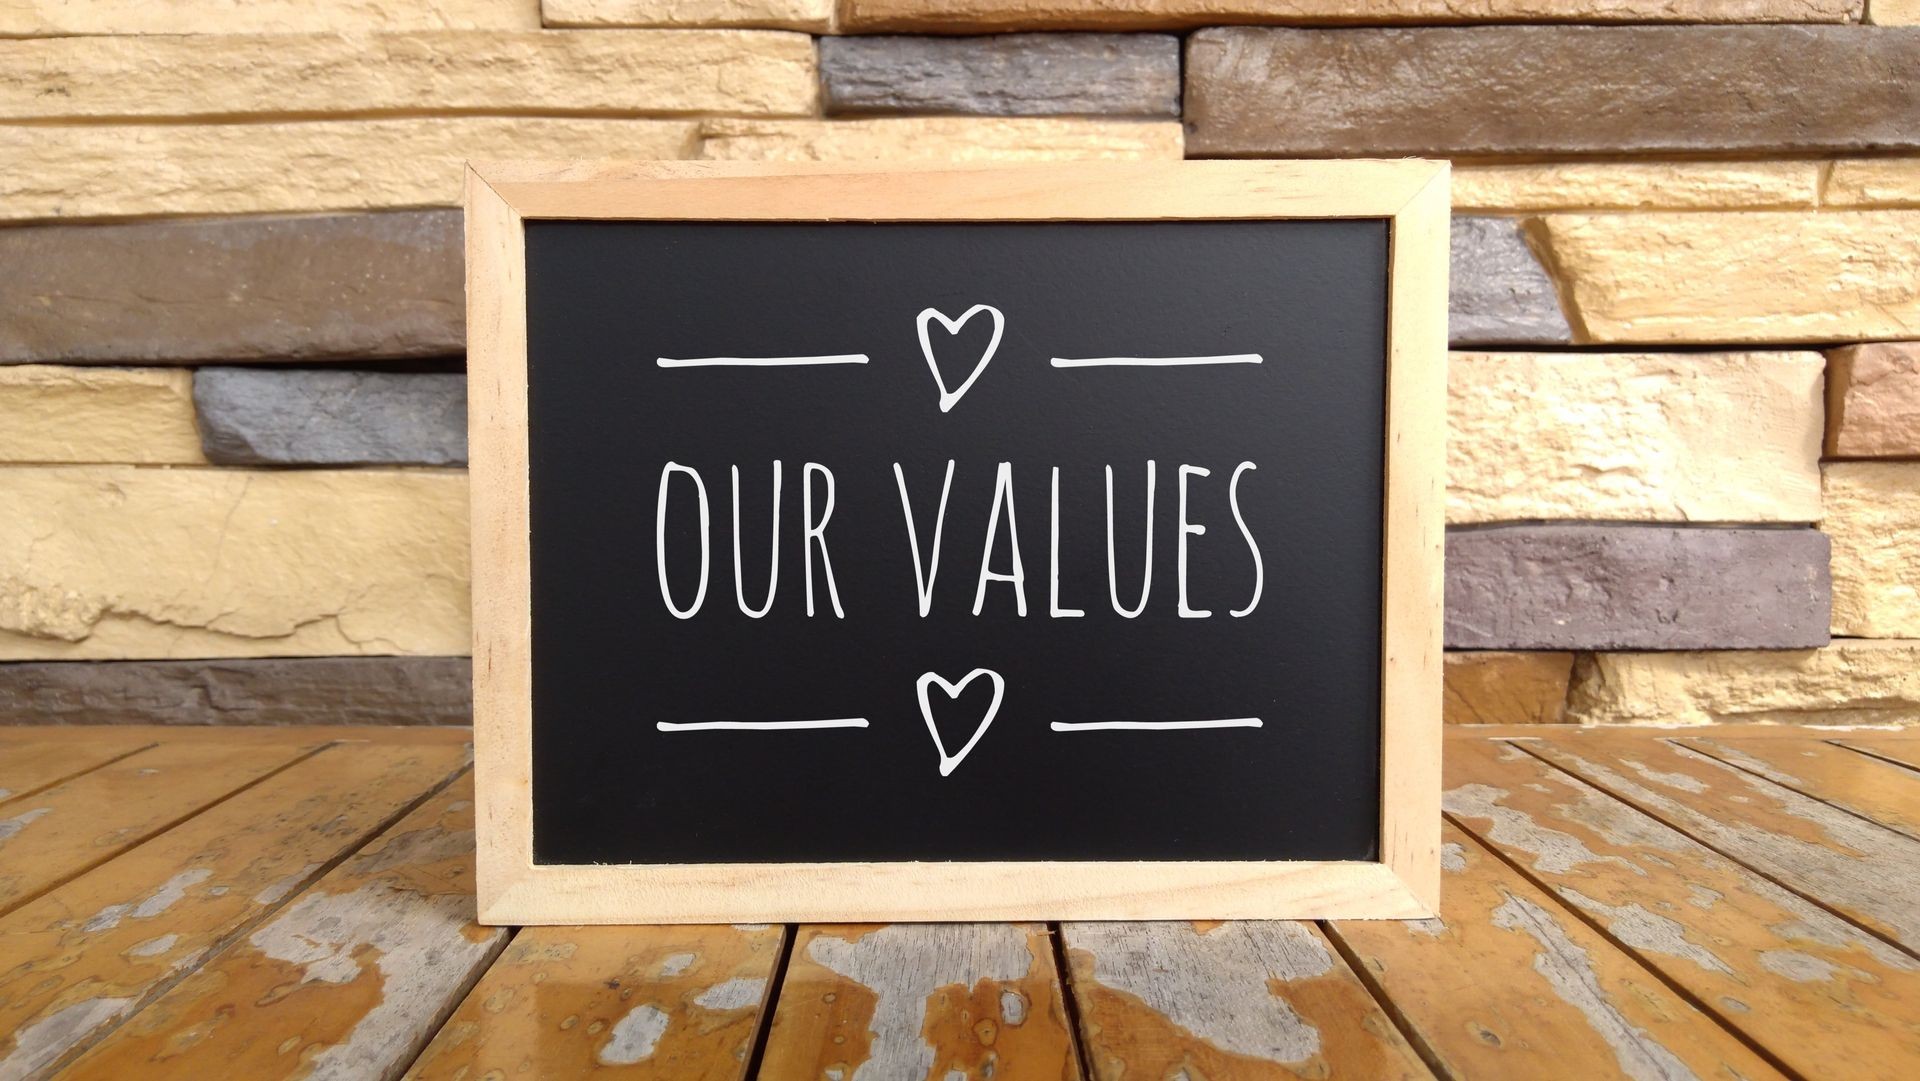 Business Concept - Chalk board with inscription our values on a wooden table.

